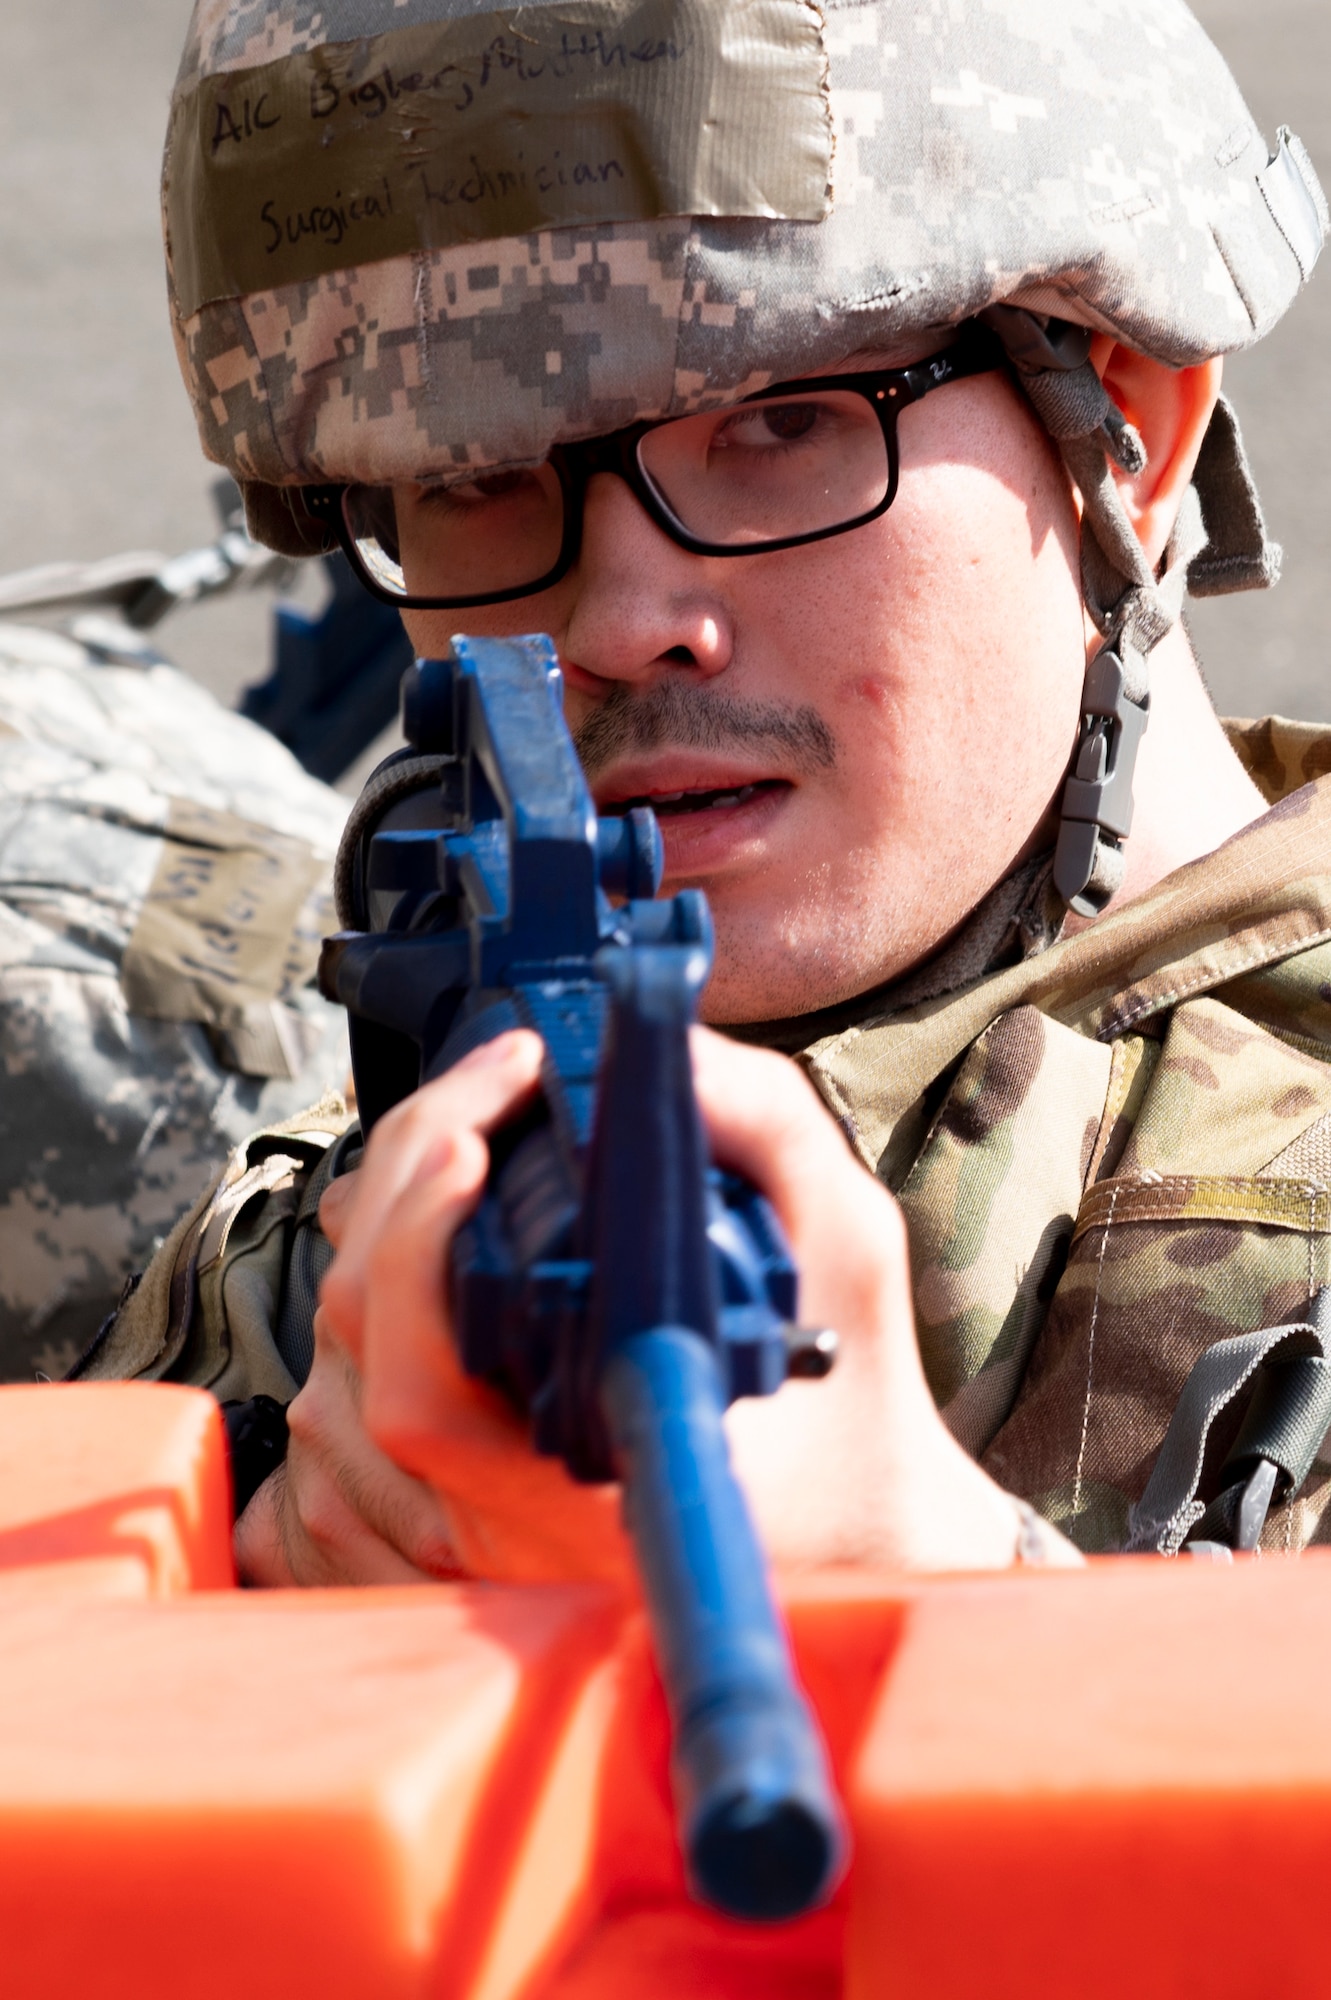 A medical airman points a simulated M-16 at the camera